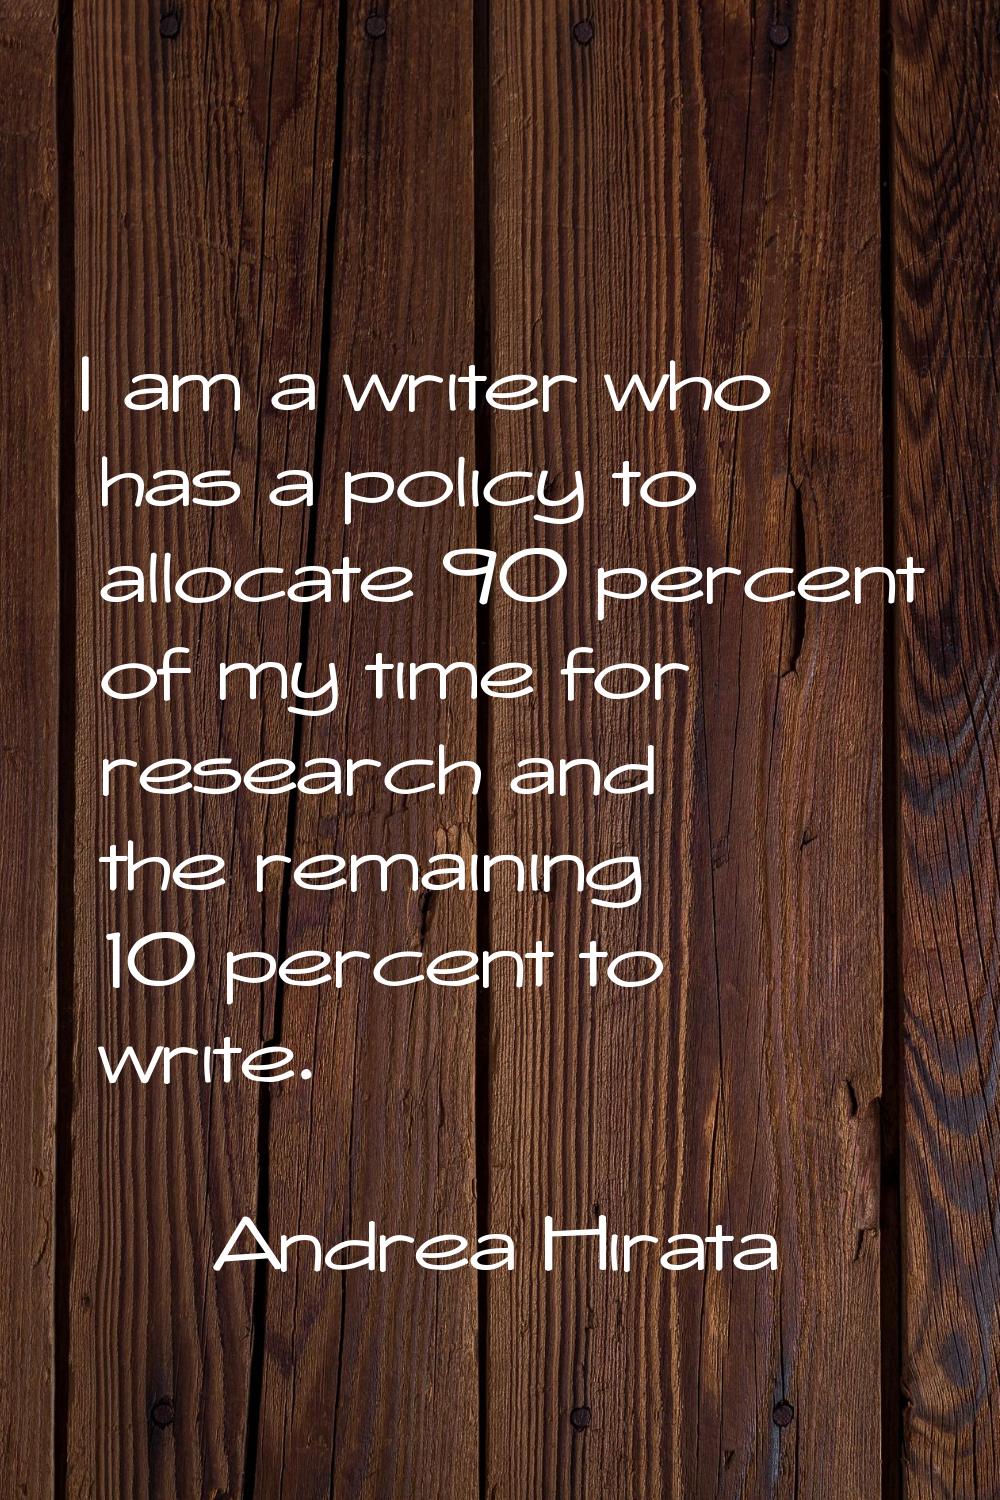 I am a writer who has a policy to allocate 90 percent of my time for research and the remaining 10 